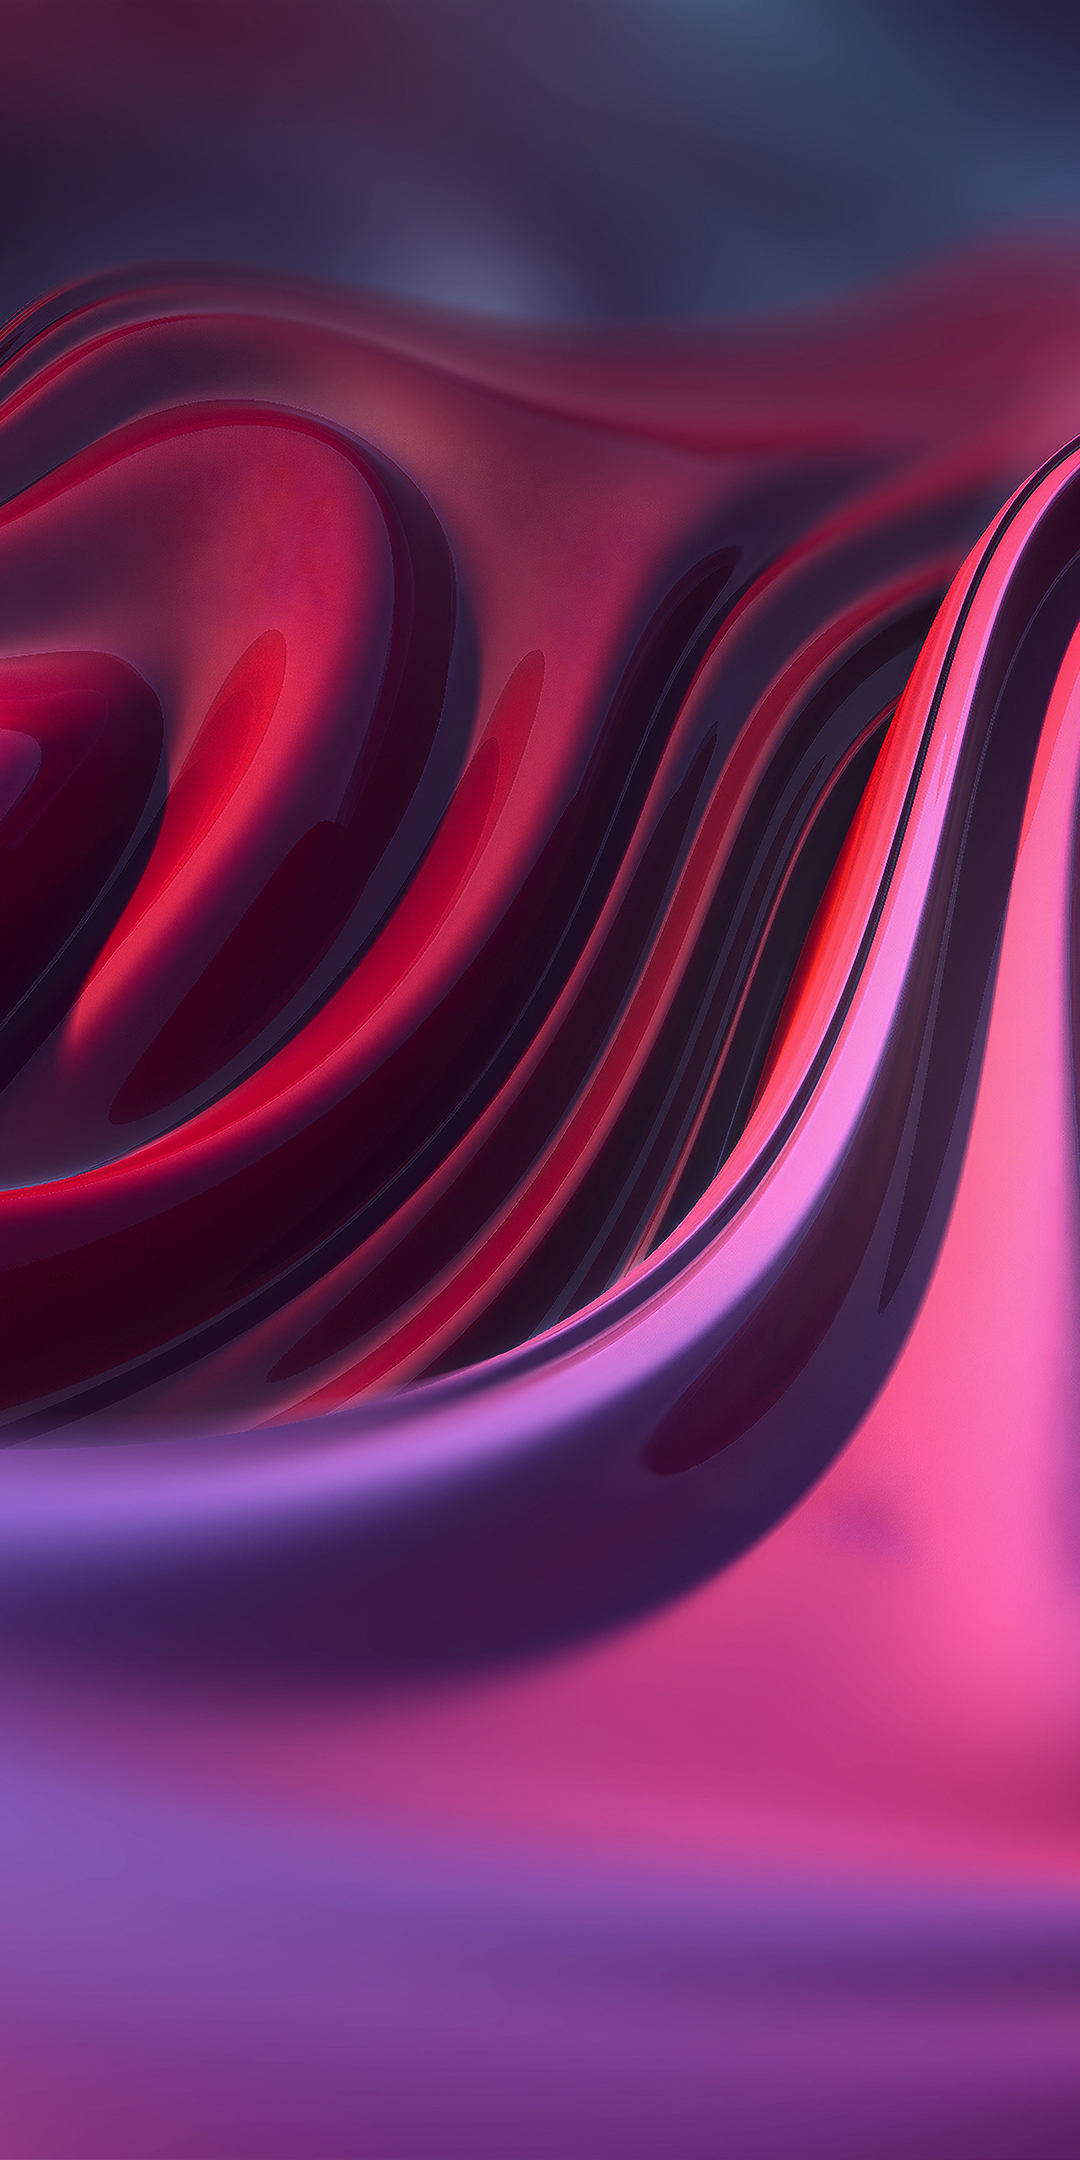 Free flow, ripple, pink, abstract, 1080x2160 wallpaper